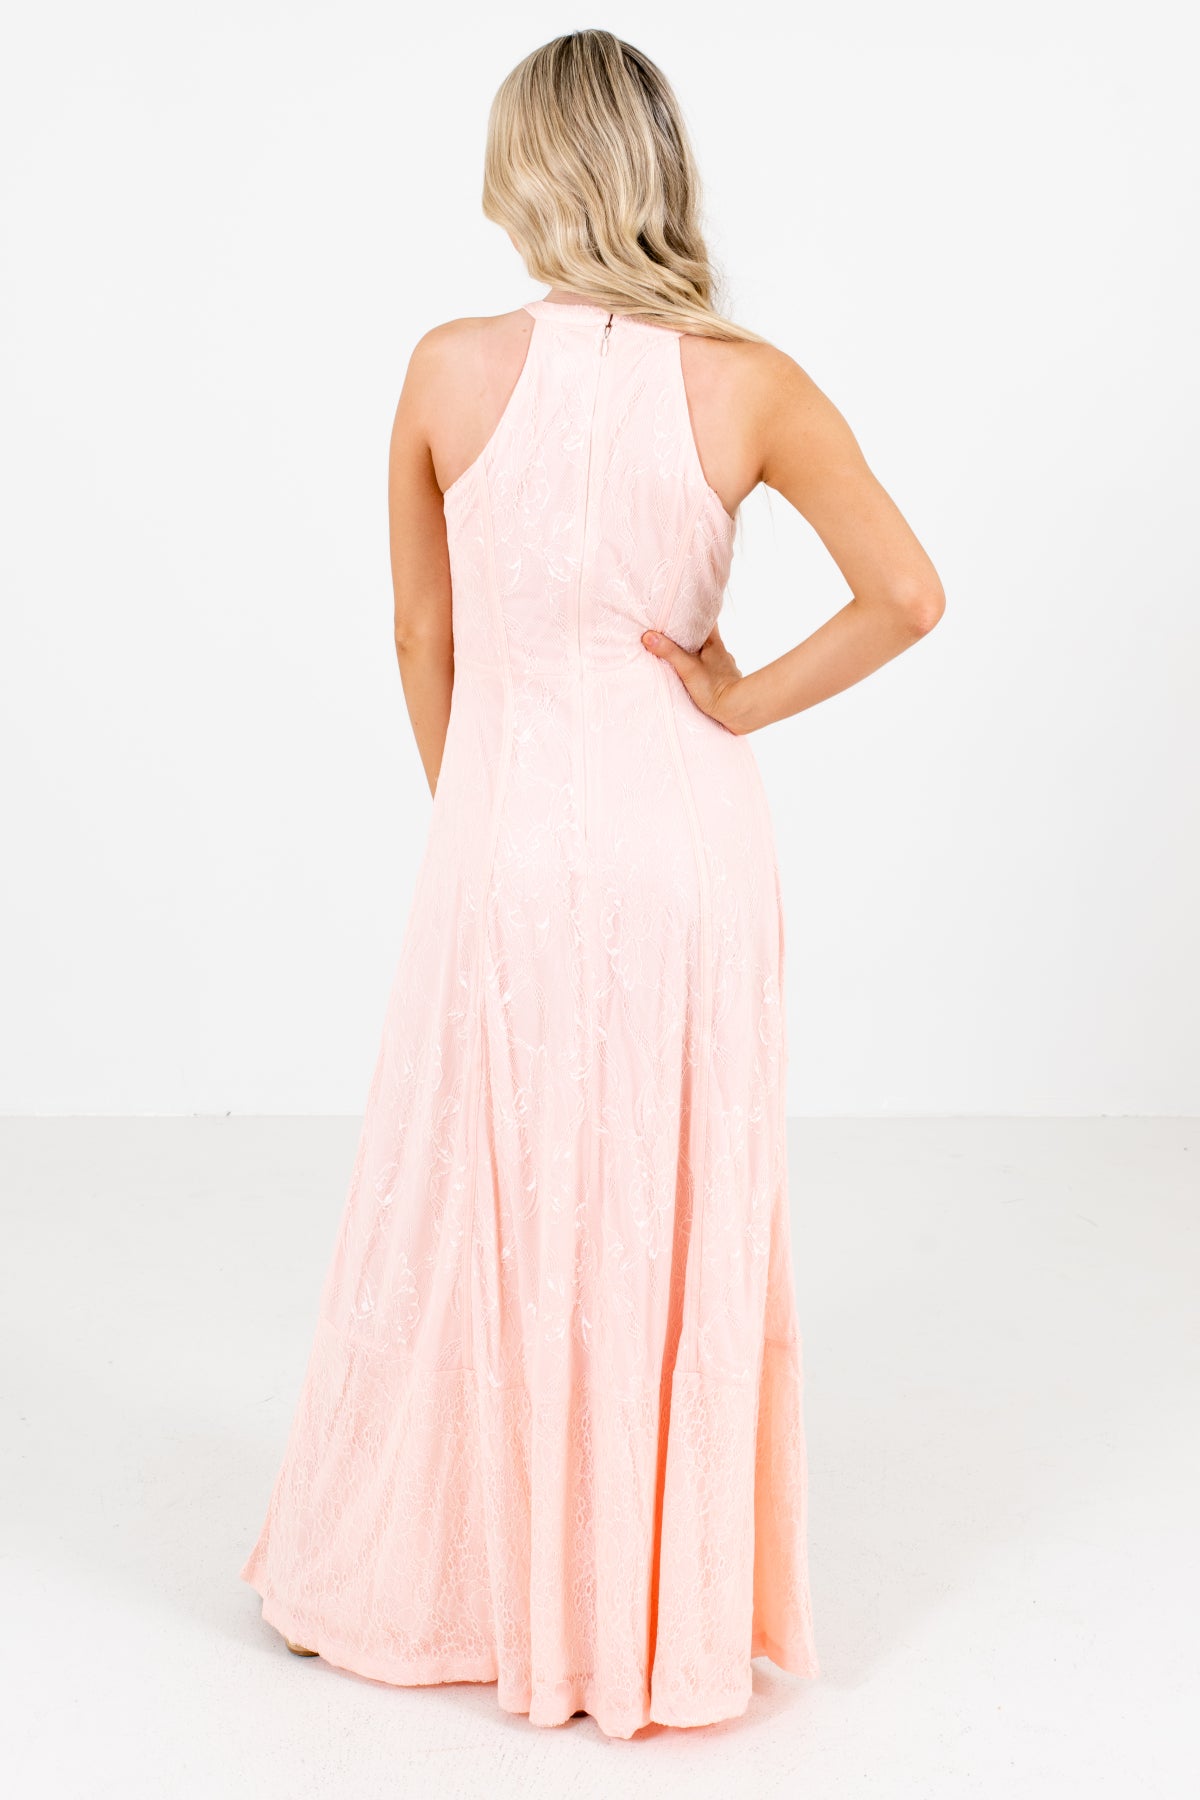 Women's Pink Lace Overlay Boutique Maxi Dress